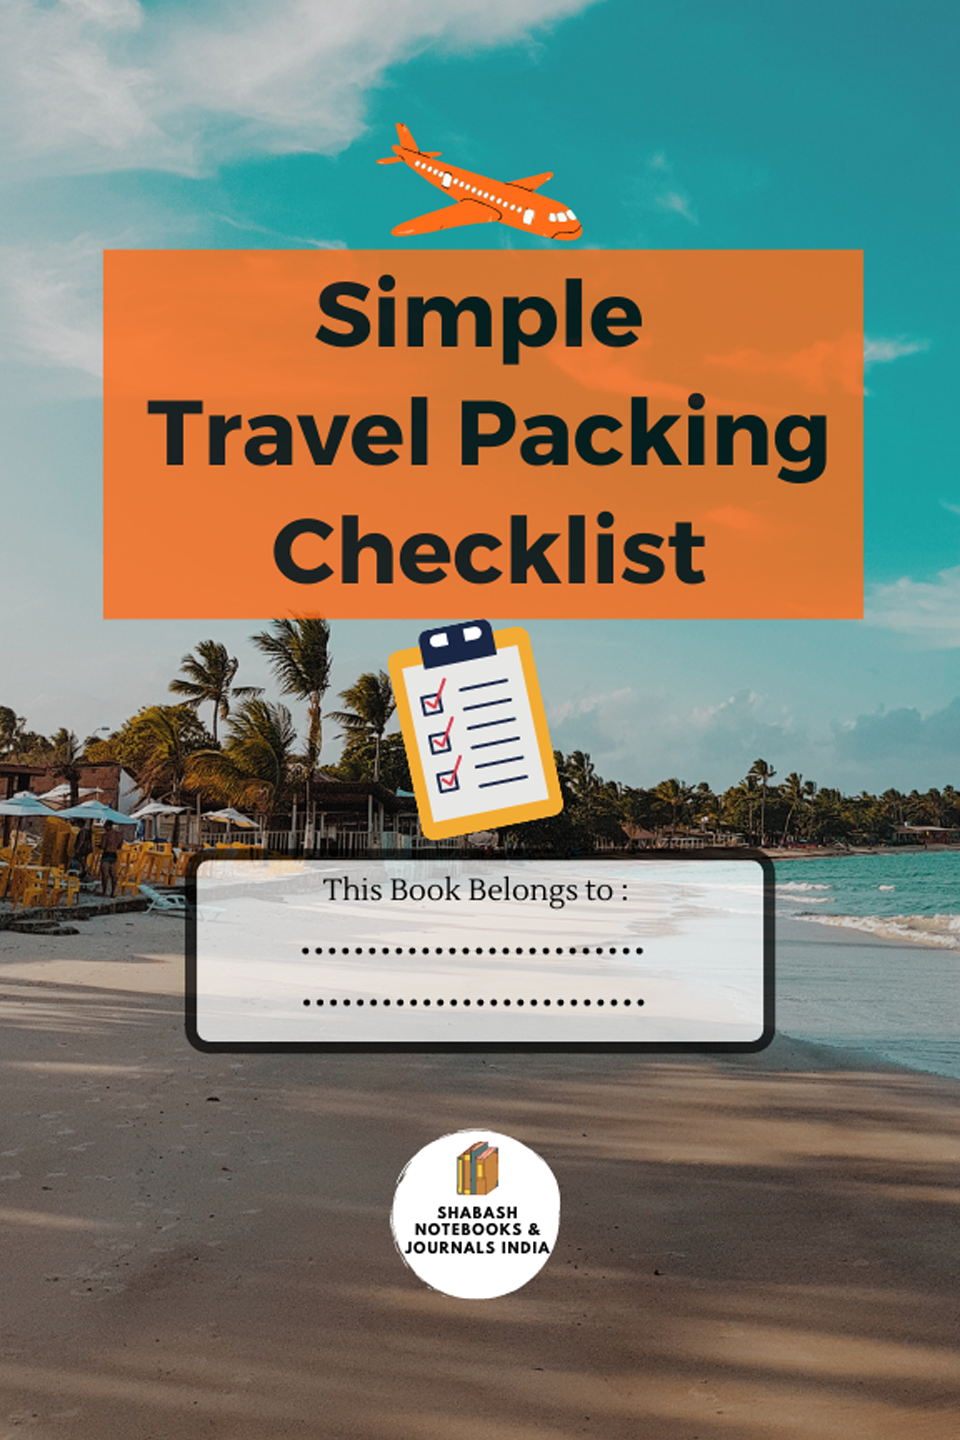 Simple Travel Packing Checklist: A Blank Notebook or Journal for Your Vacation plan, Travel checklist for Business People, Men & Women, Travelers Checklist for Holiday or Business's Book Image